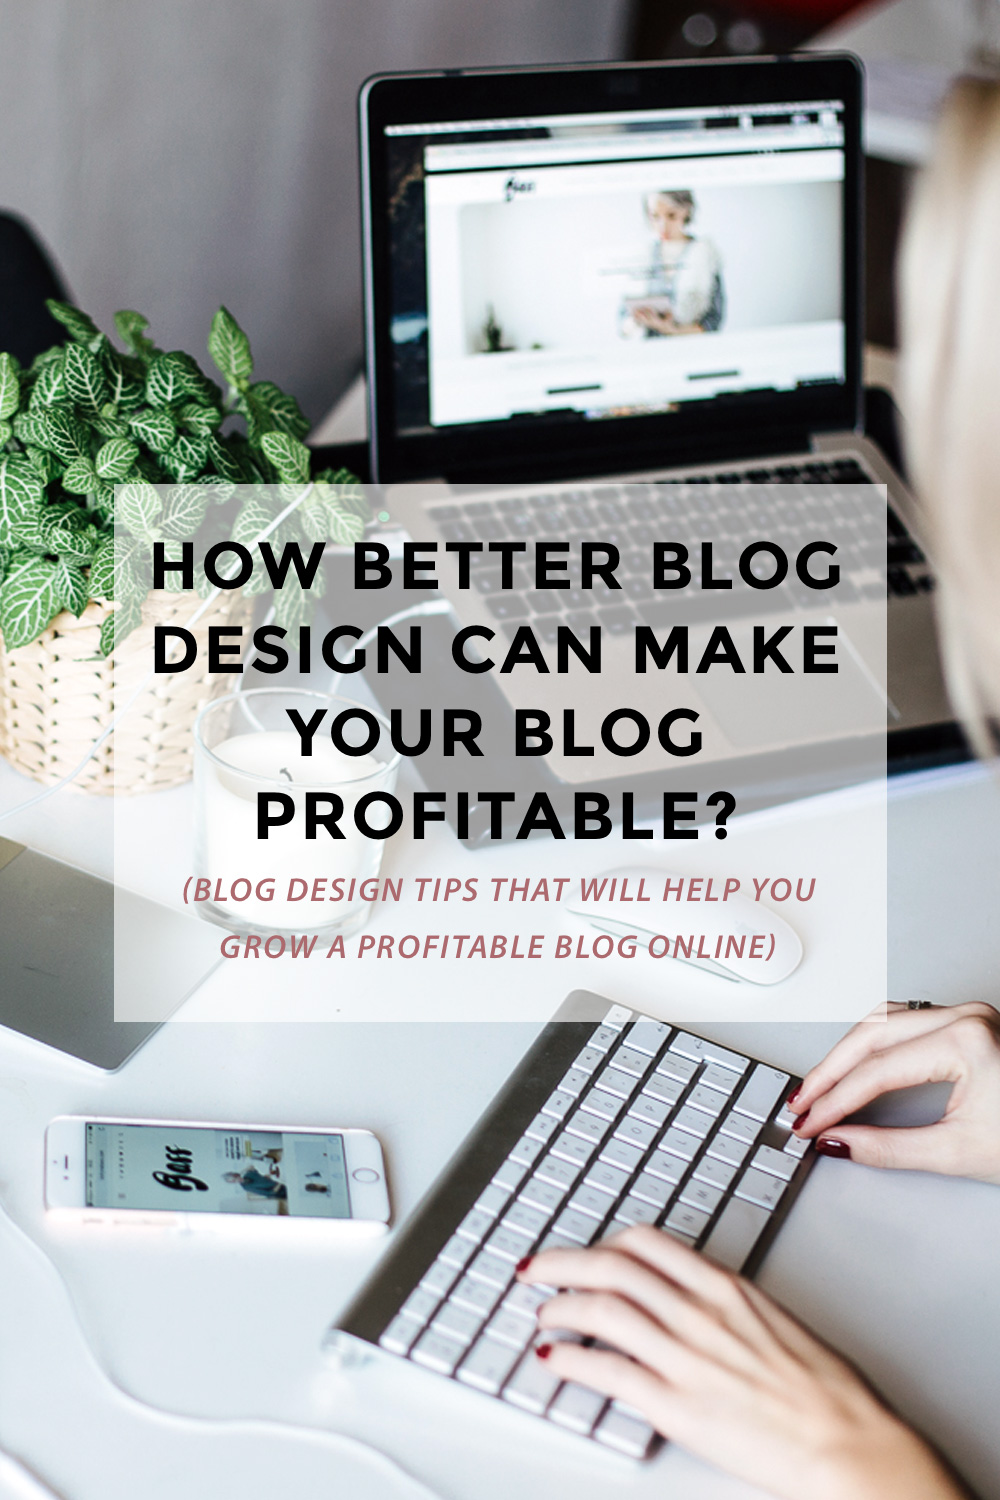 Here are some of the elements you should consider incorporating into your theme if you want to have a profitable, thriving blog. (blog design tips, blogging tips, profitable blog, blogging for profit, blogging for money)